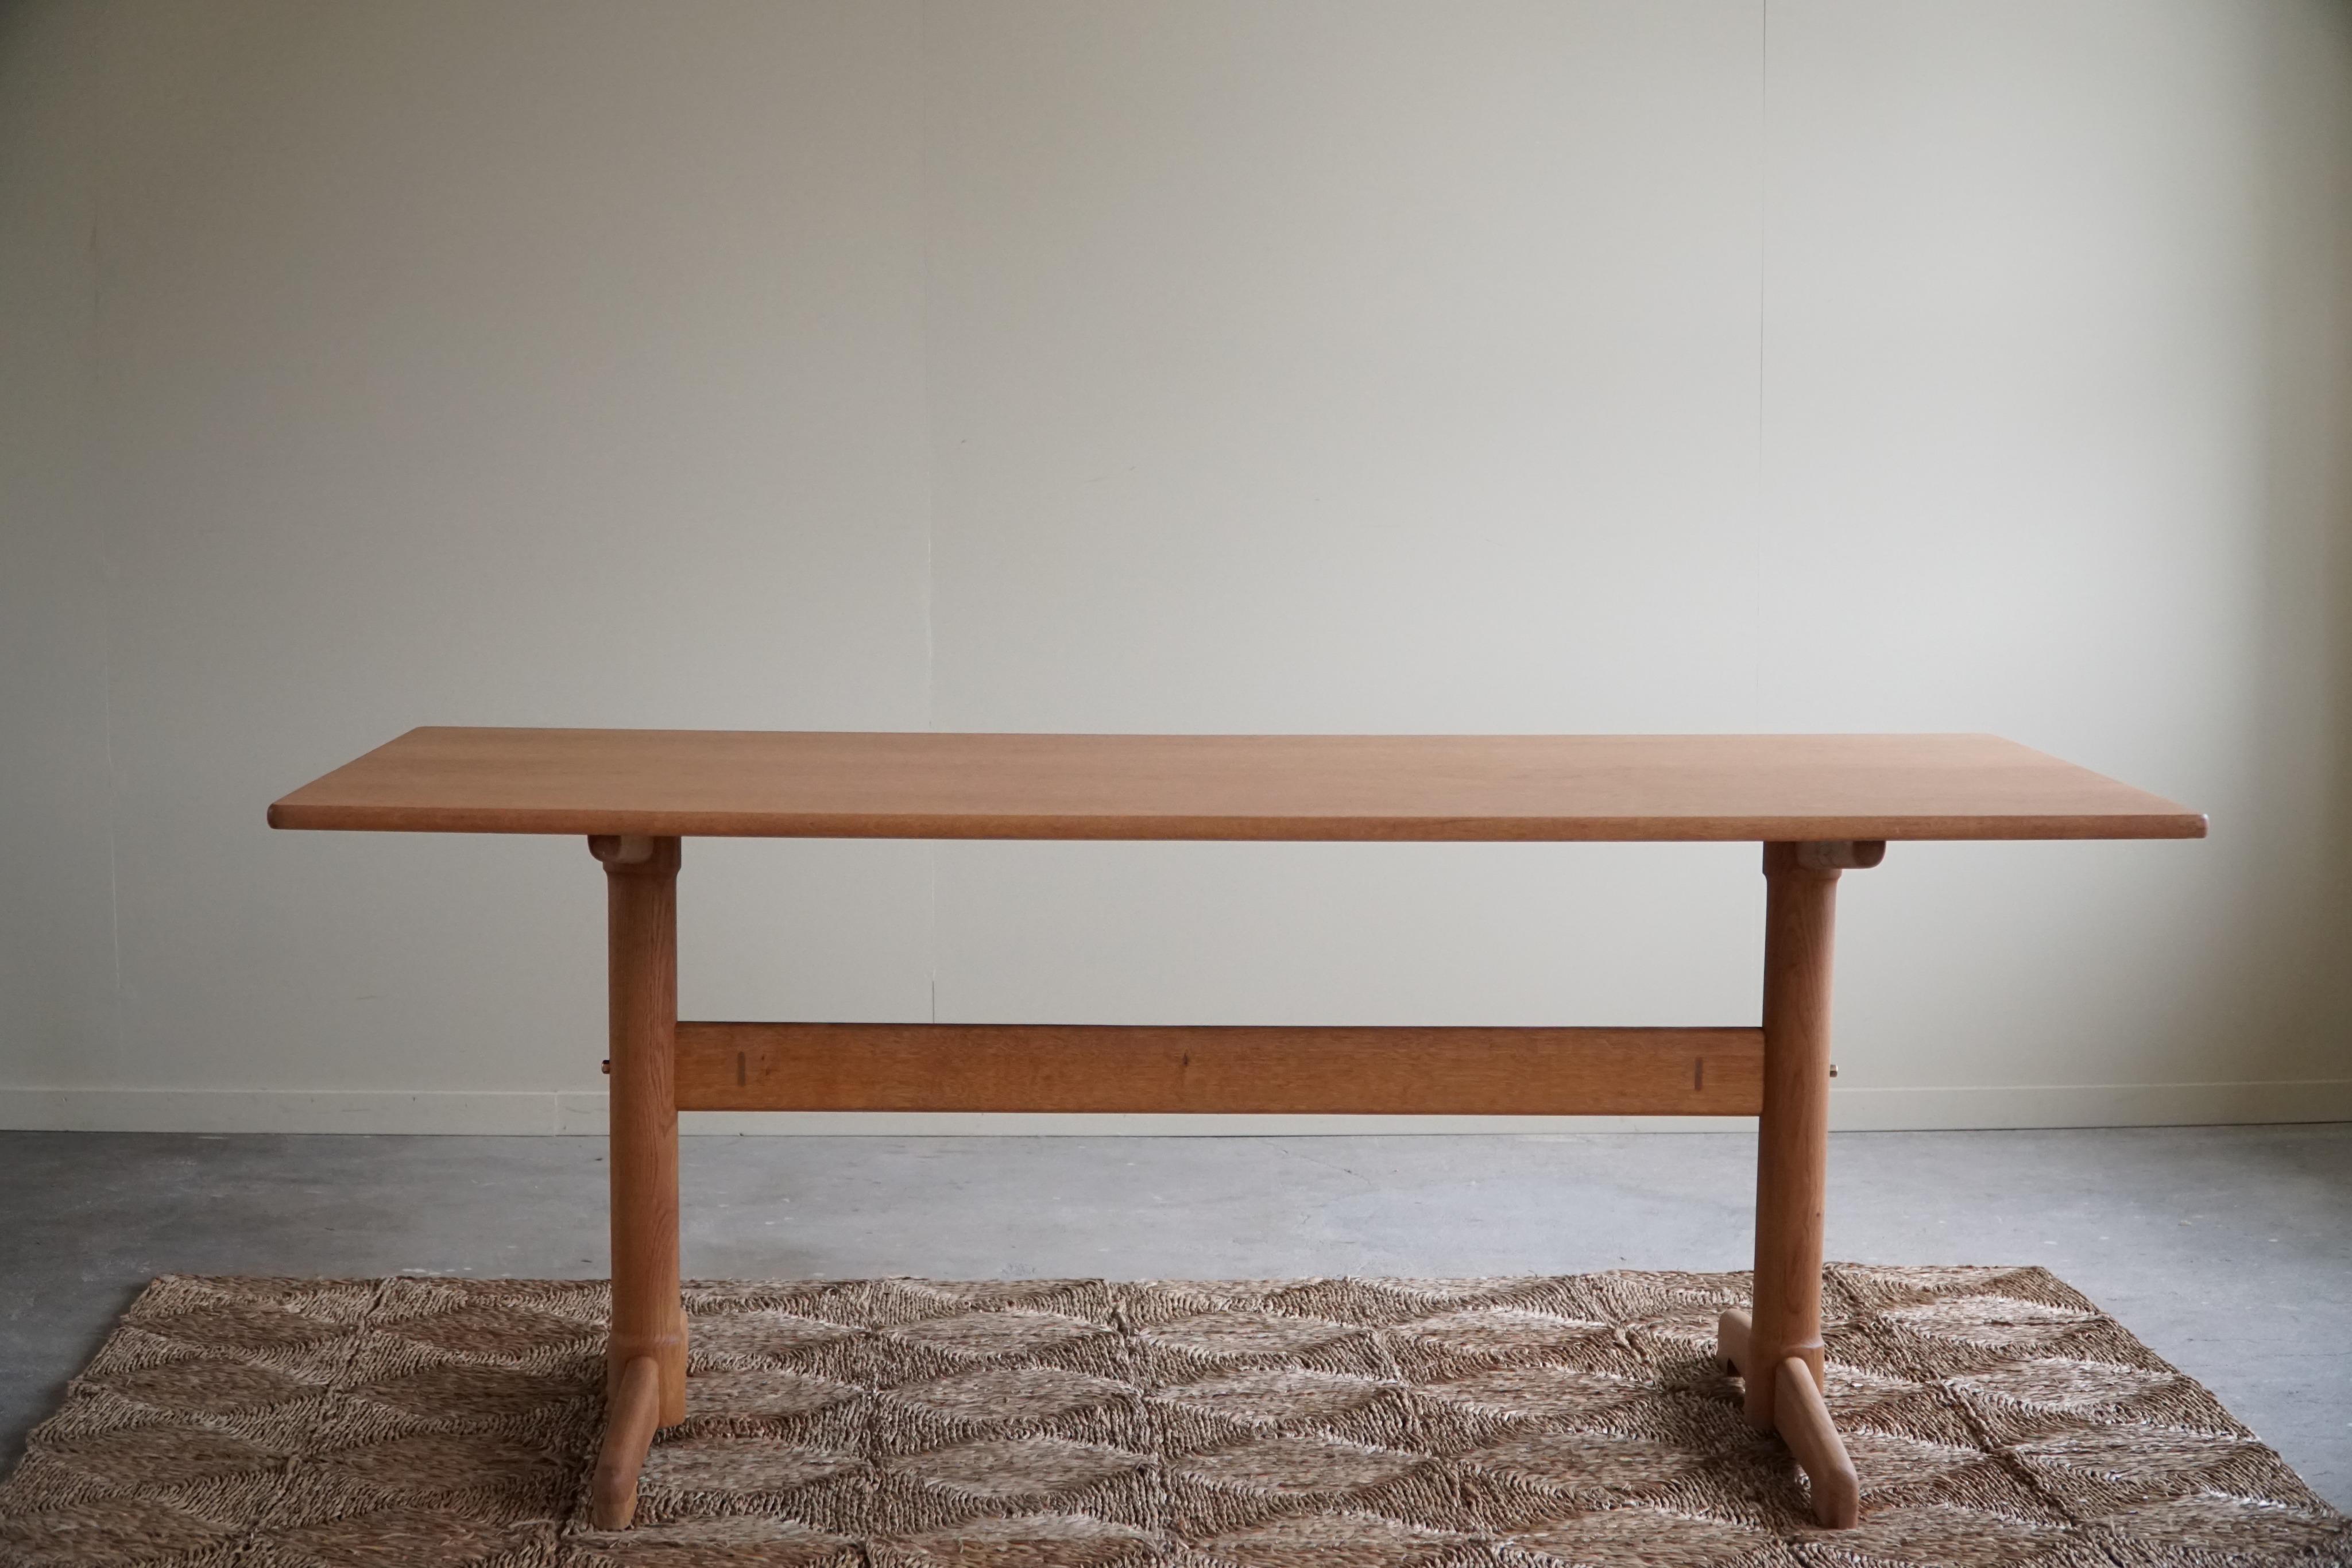 An elegant and classic rectangular dining table in a solid oak frame & teak veneered top. Designed by the Danish couple Ditte and Adrian Heath in the 1960s for A/S Søborg Møbelfabrik. A true collectible item from the Danish modern era. 

This